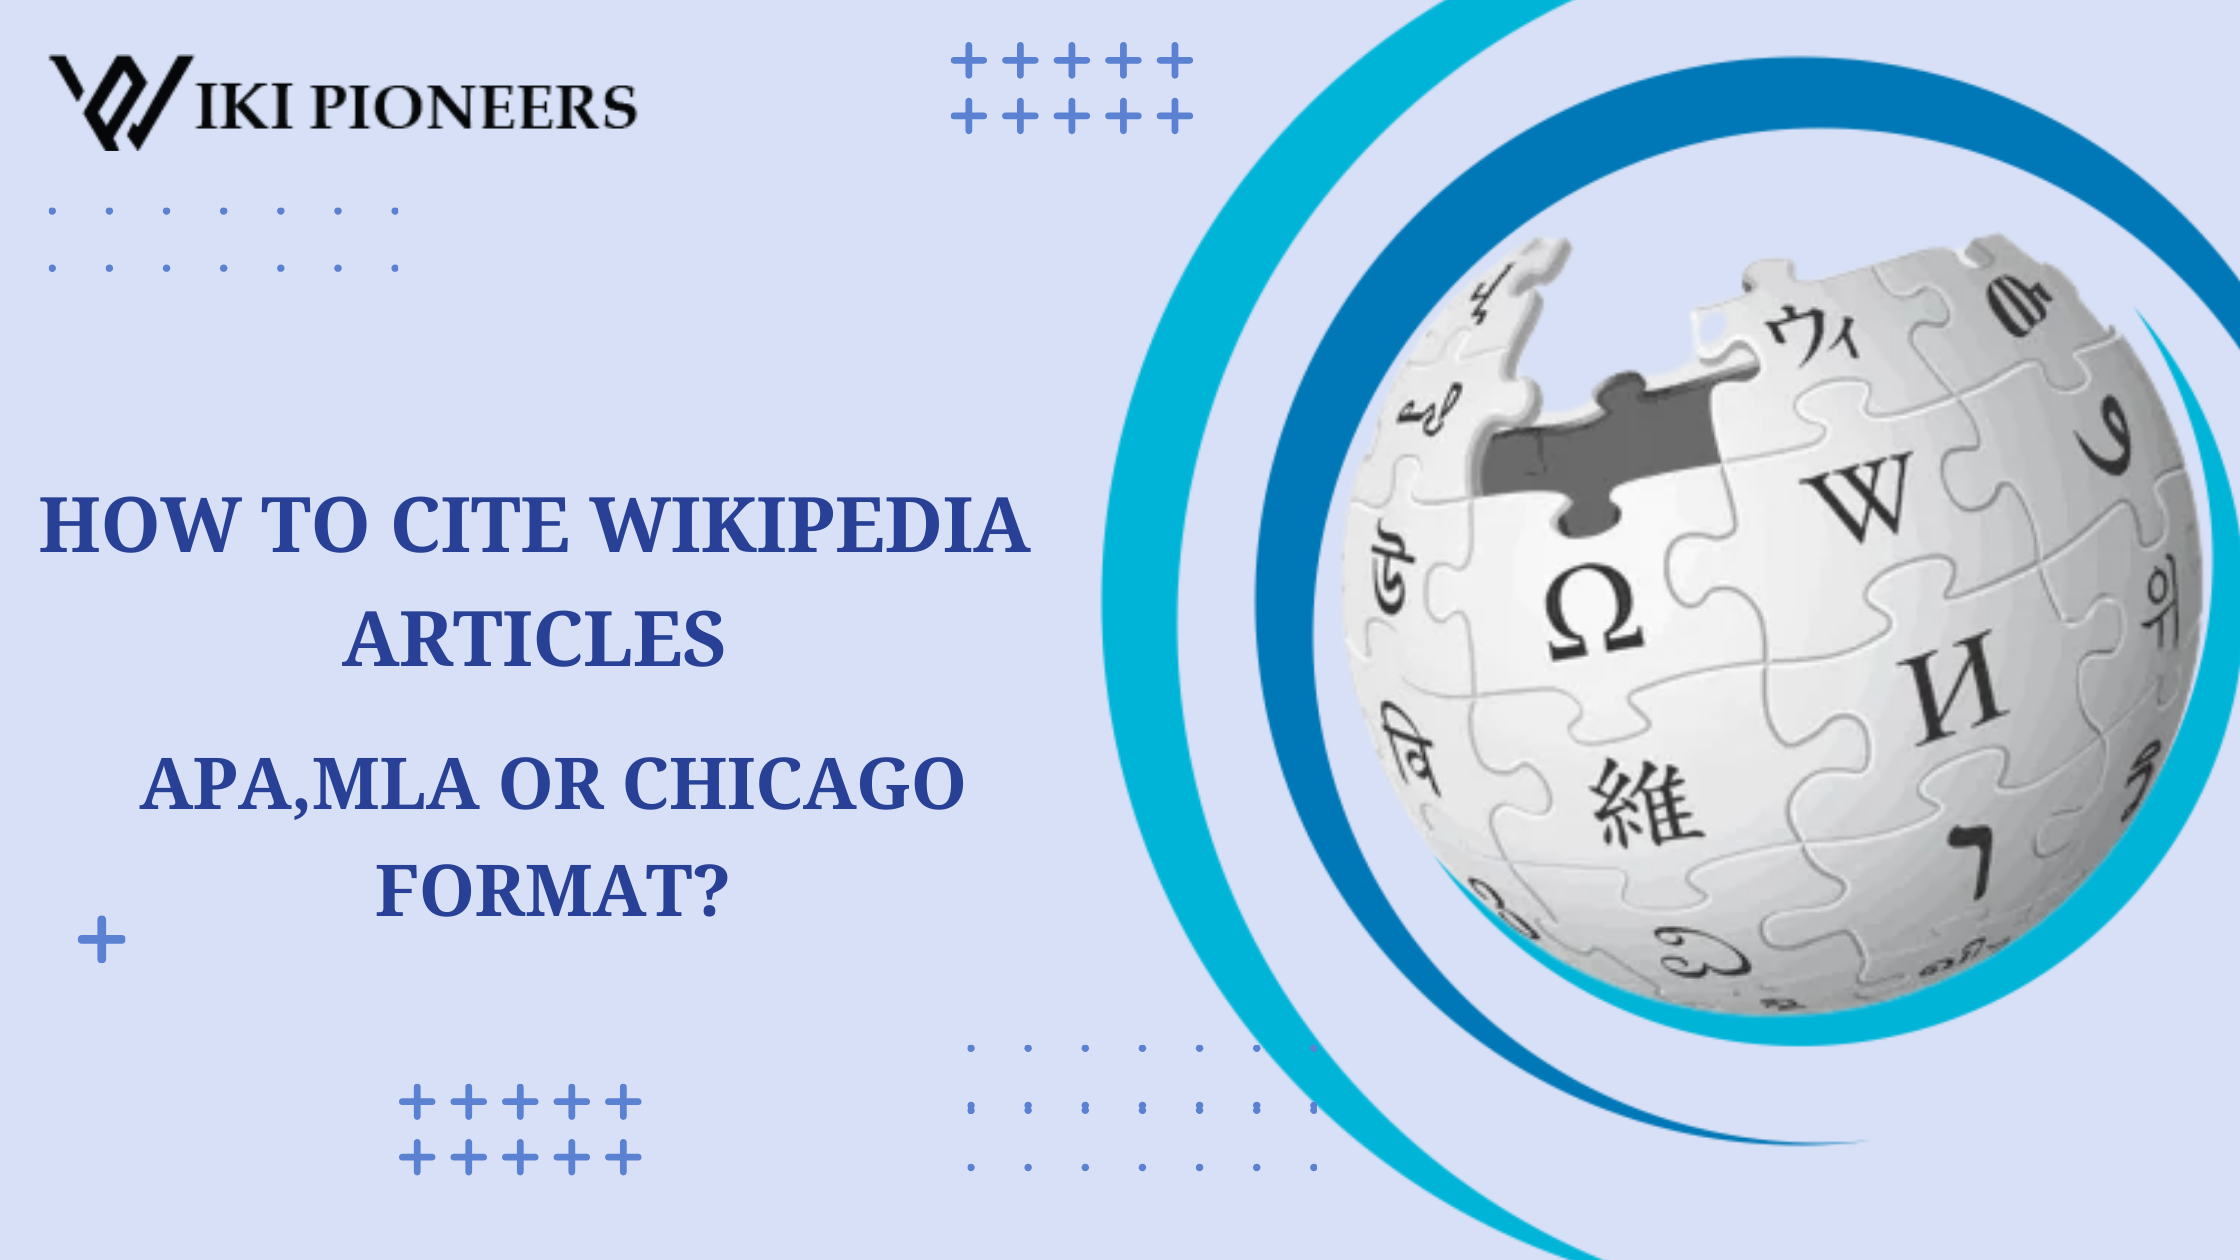 How do you Cite Wikipedia Articles in APA, MLA, and Chicago format?